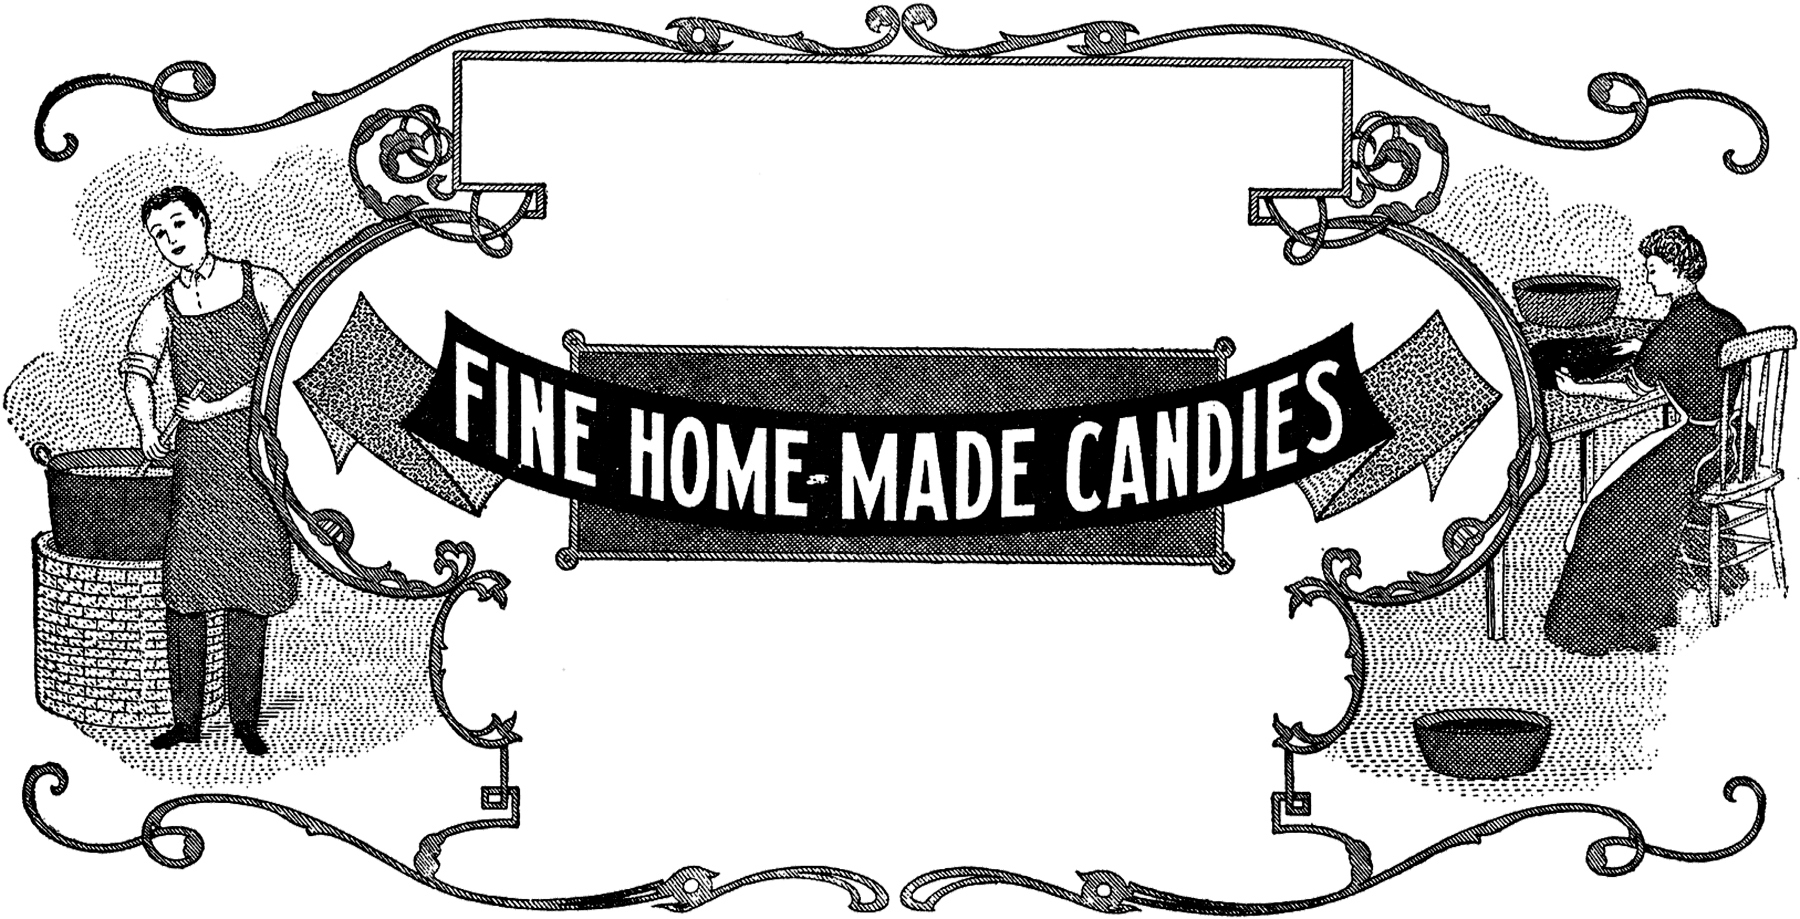 Vintage Homemade Candy Label! - The Graphics Fairy